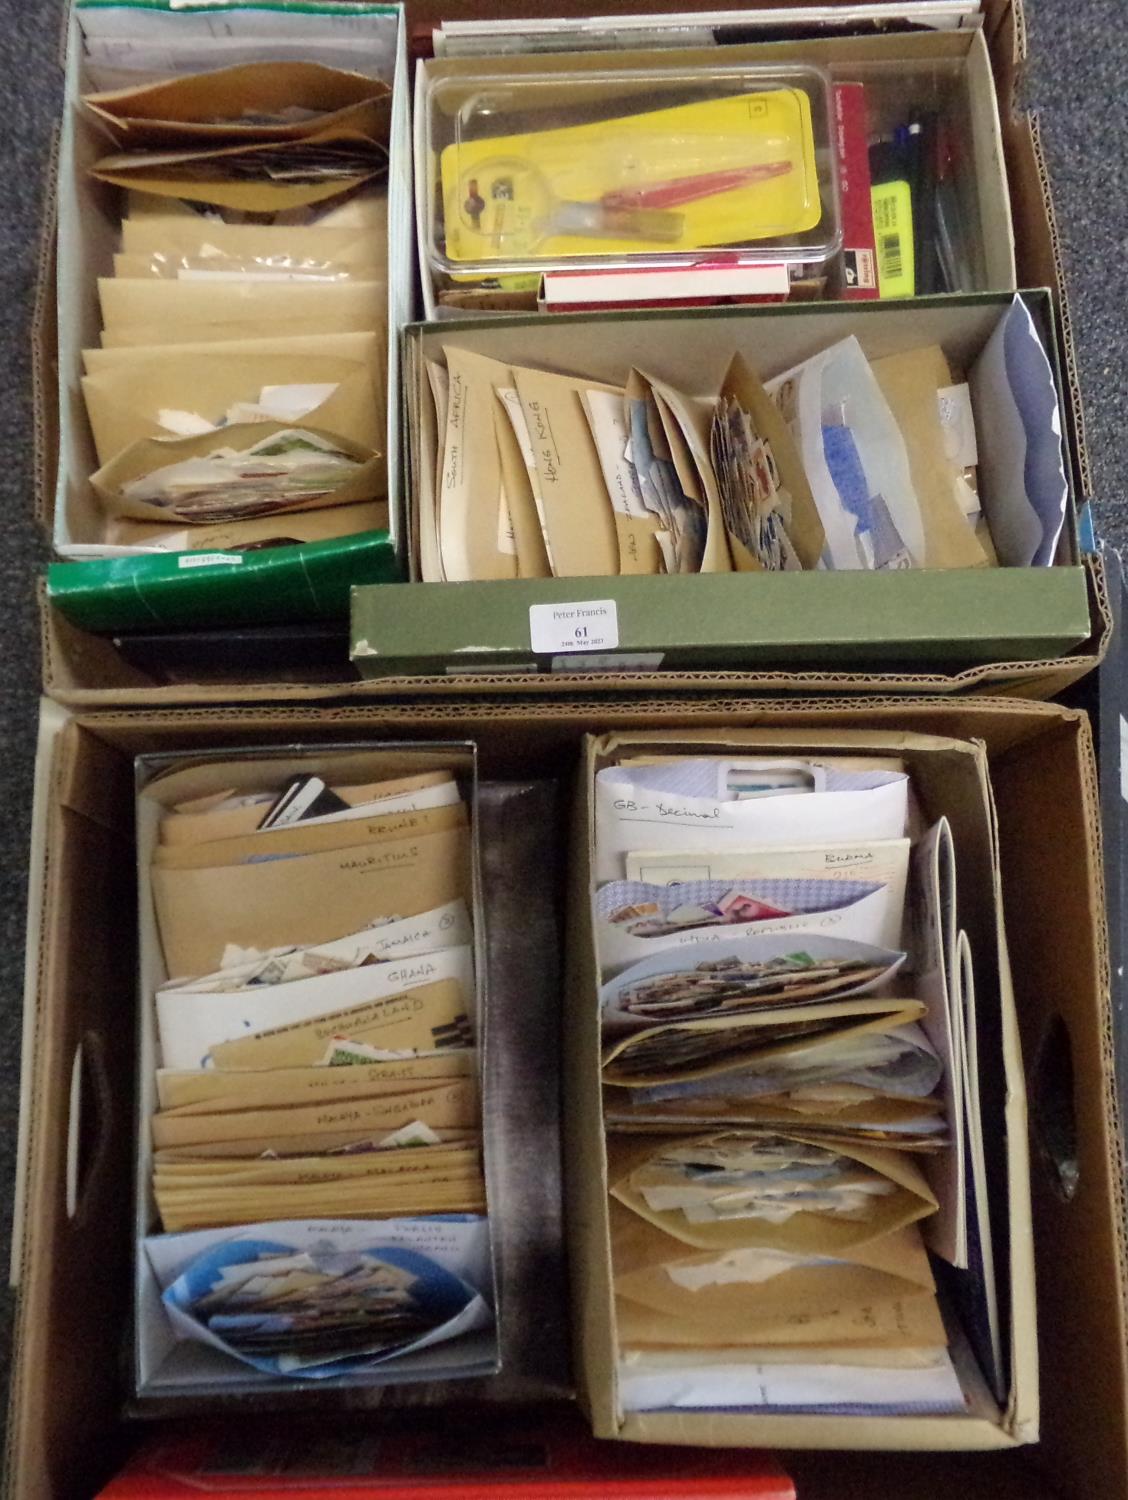 Two boxes of All World stamps sorted into envelopes in shoe boxes and stamp mounts together with